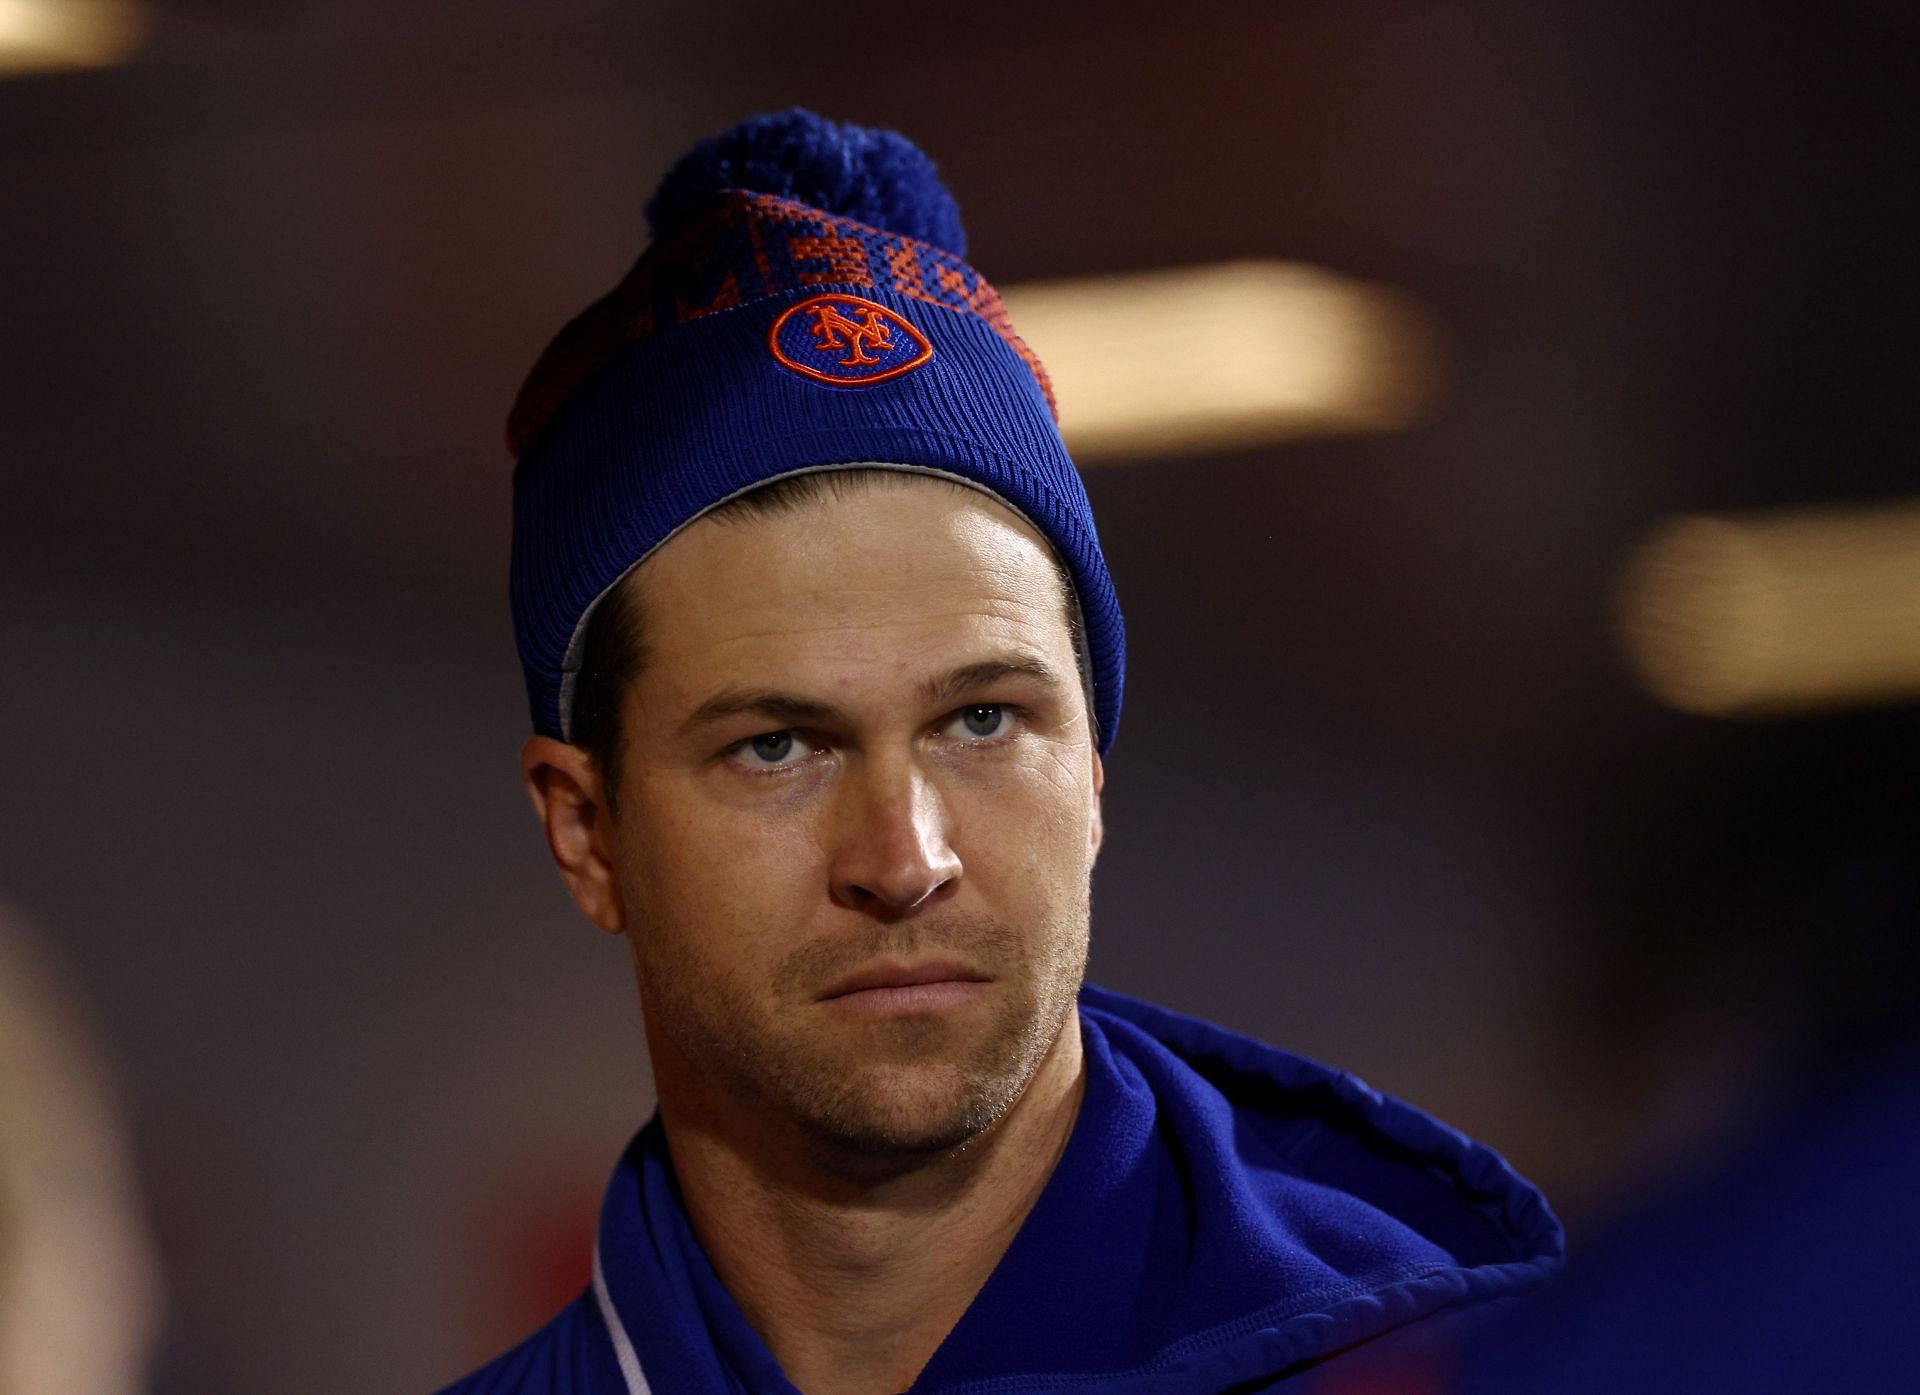 It's official: Texas Rangers shock the world by signing Jacob deGrom